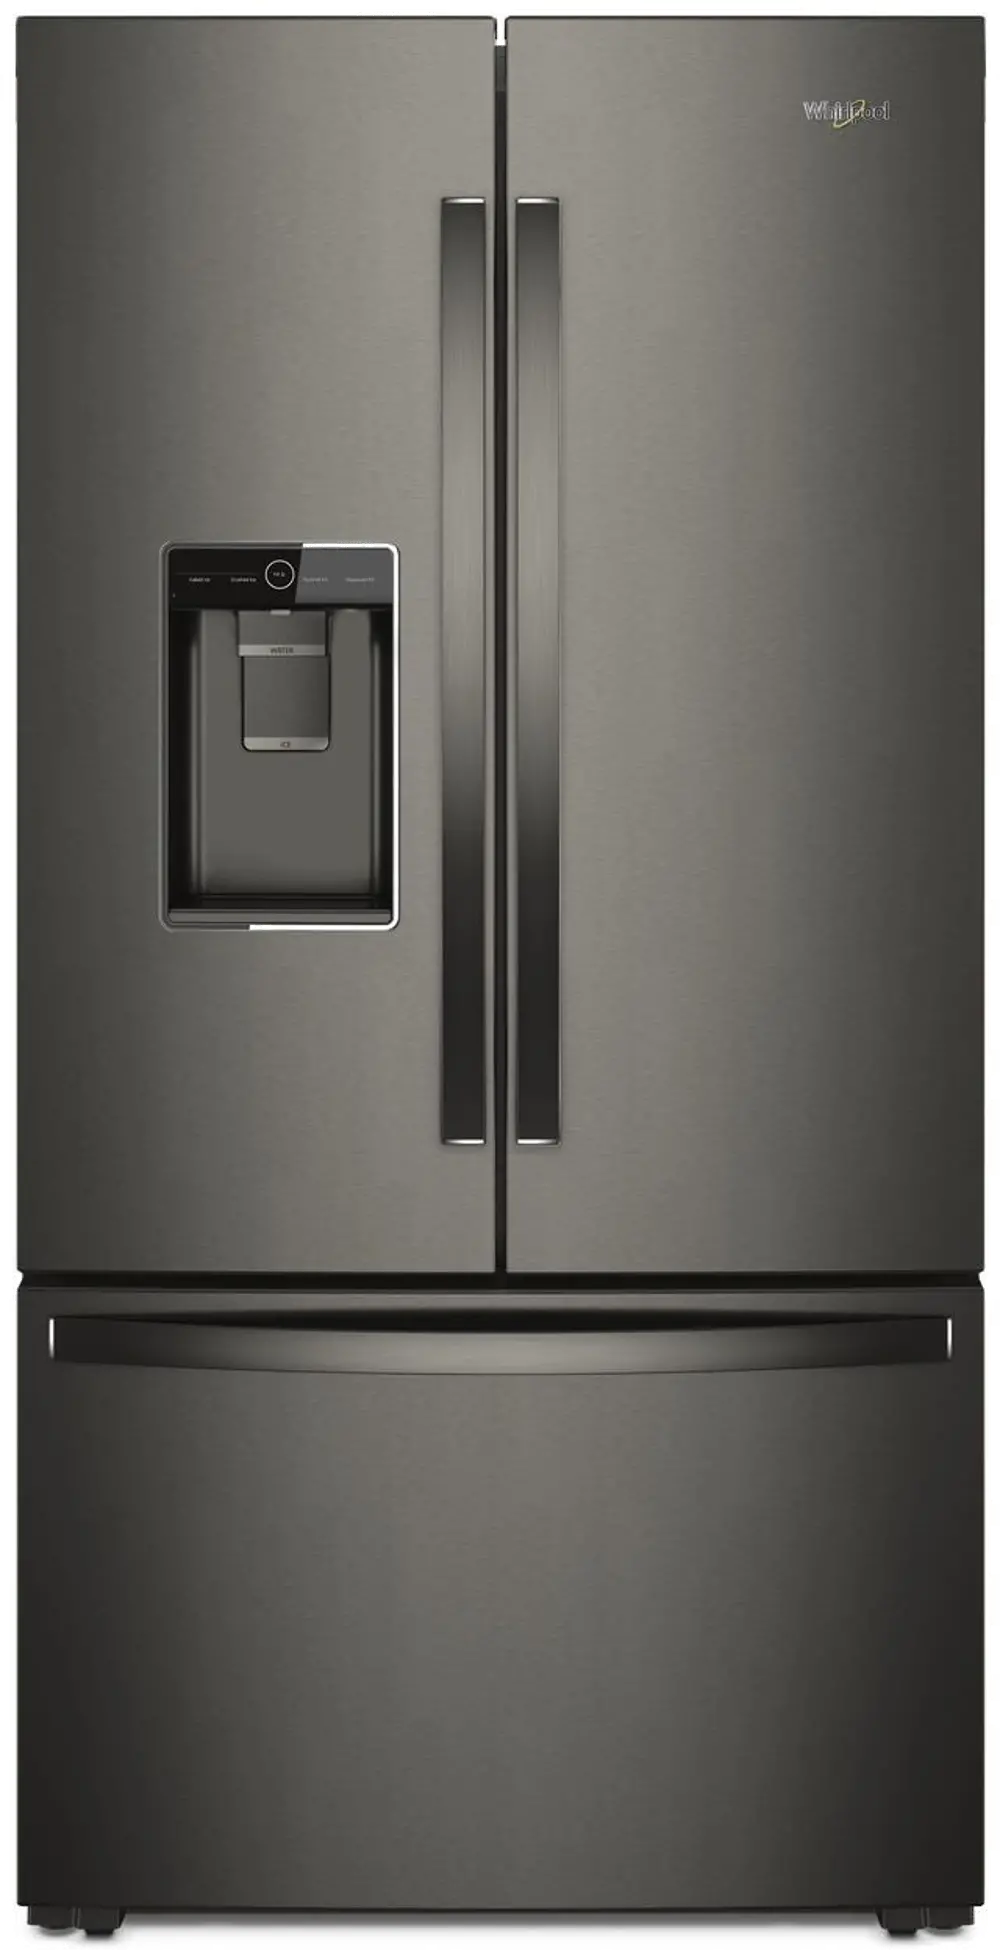 WRF954CIHV Whirlpool Counter Depth French Door Refrigerator - 36 Inch, 23.8 cu. ft. Black Stainless Steel-1